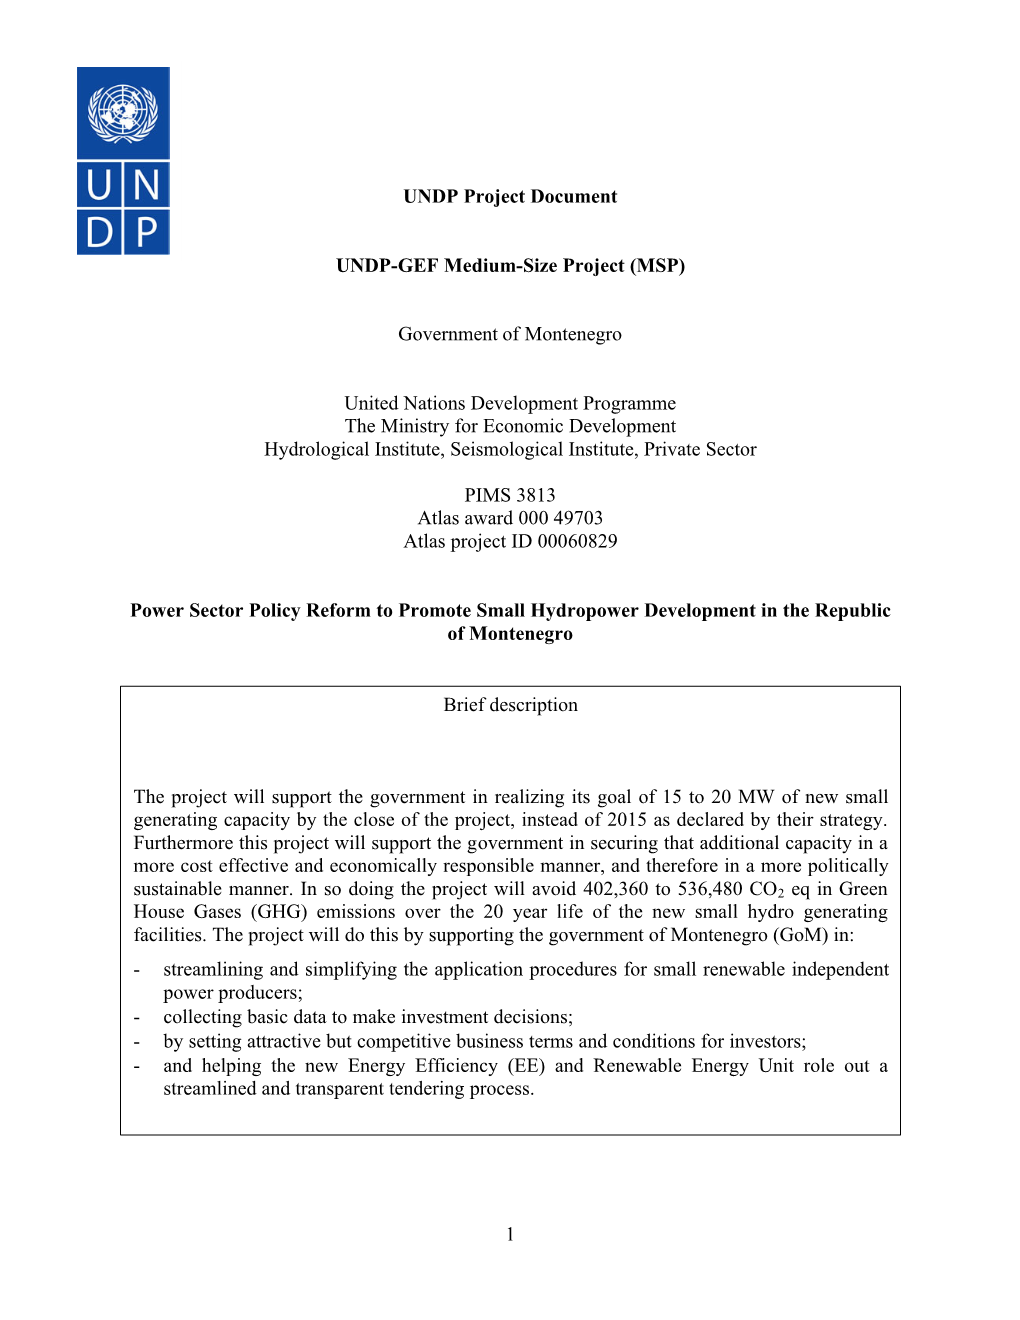 1 UNDP Project Document UNDP-GEF Medium-Size Project (MSP) Government of Montenegro United Nations Development Programme The